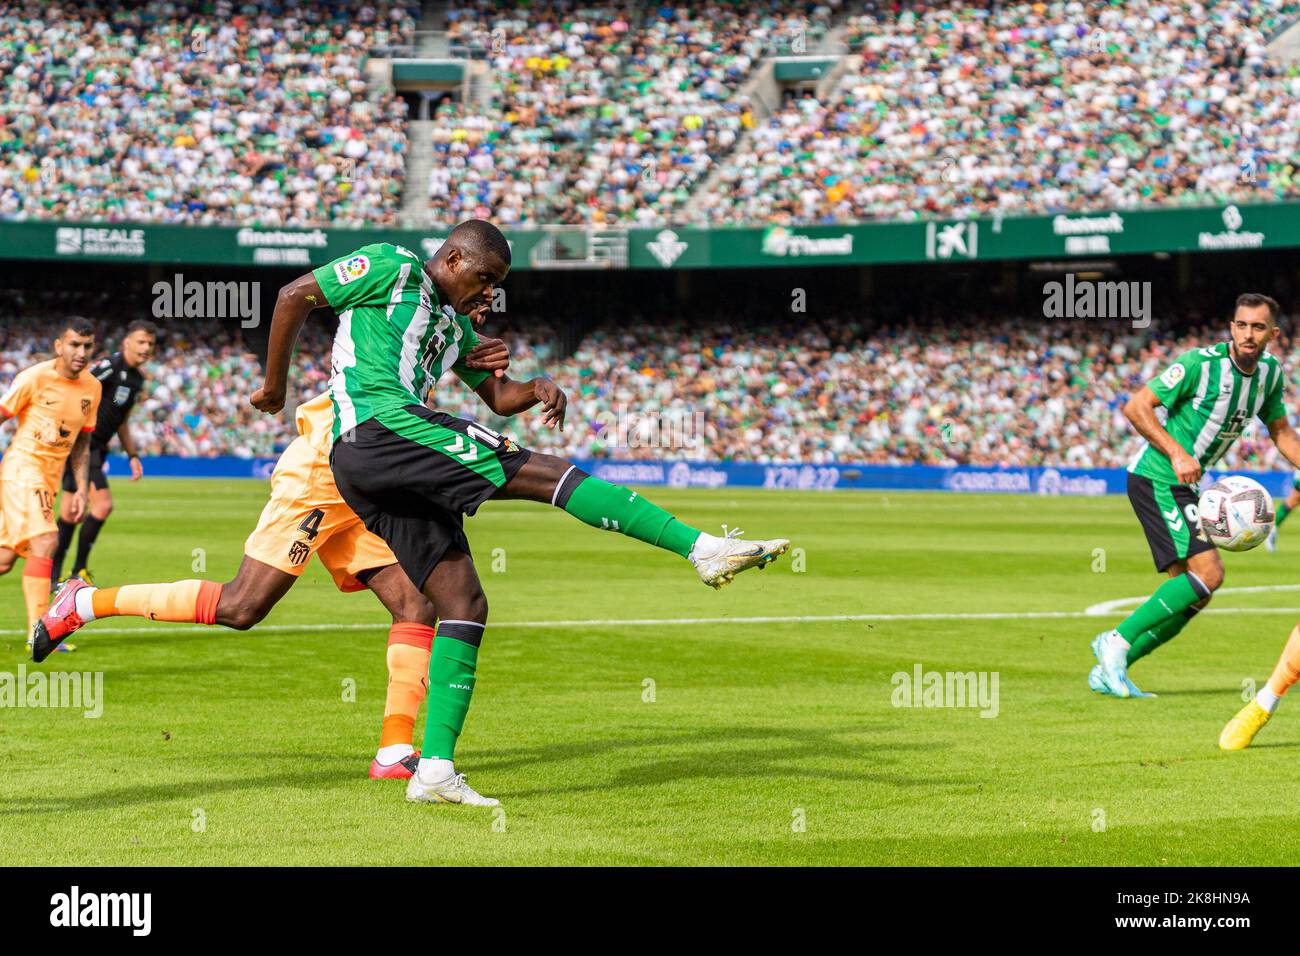 Seville, Spain. 23rd Oct, 2022. William Carvalho (L) of Real Betis seen in action during the La Liga Santander 2022/2023 match between Real Betis and Atletico de Madrid at Benito Villamarin Stadium.(Final Score; Real Betis 1:2 Atletico de Madrid) Credit: SOPA Images Limited/Alamy Live News Stock Photo